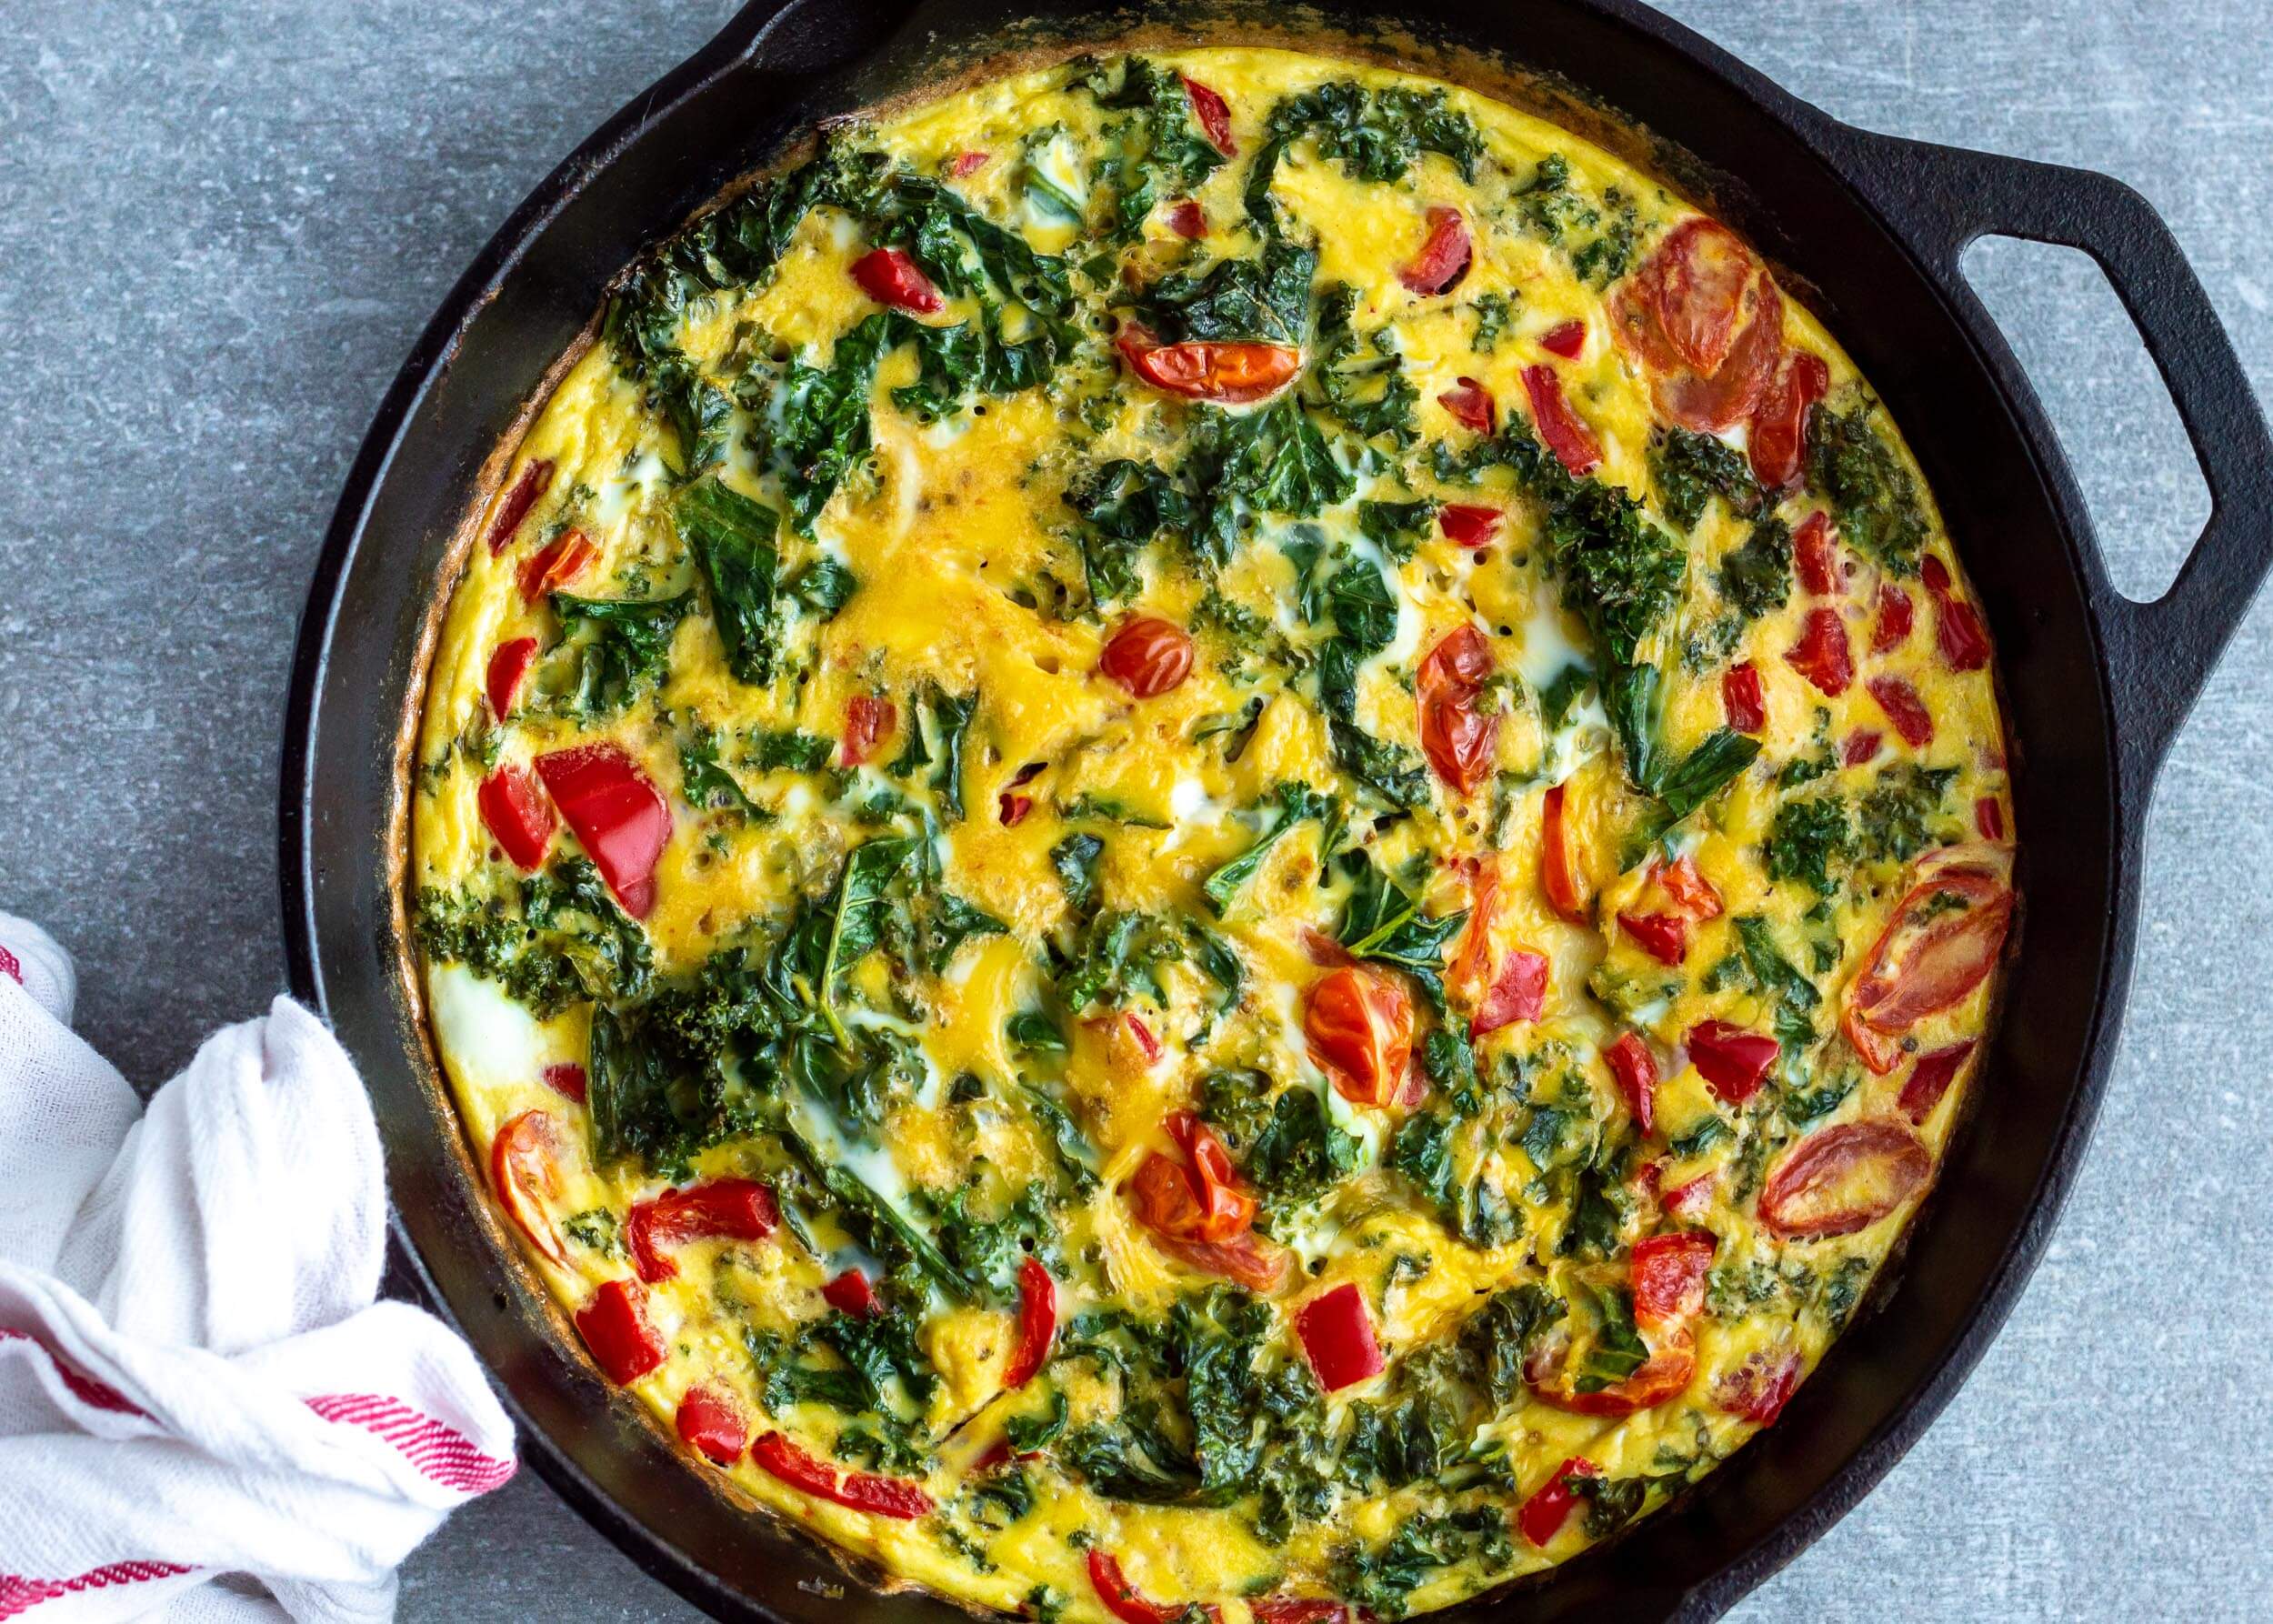 21 One Pan Meal Ideas Your Clients Will Love: Kale & Red Pepper Frittata